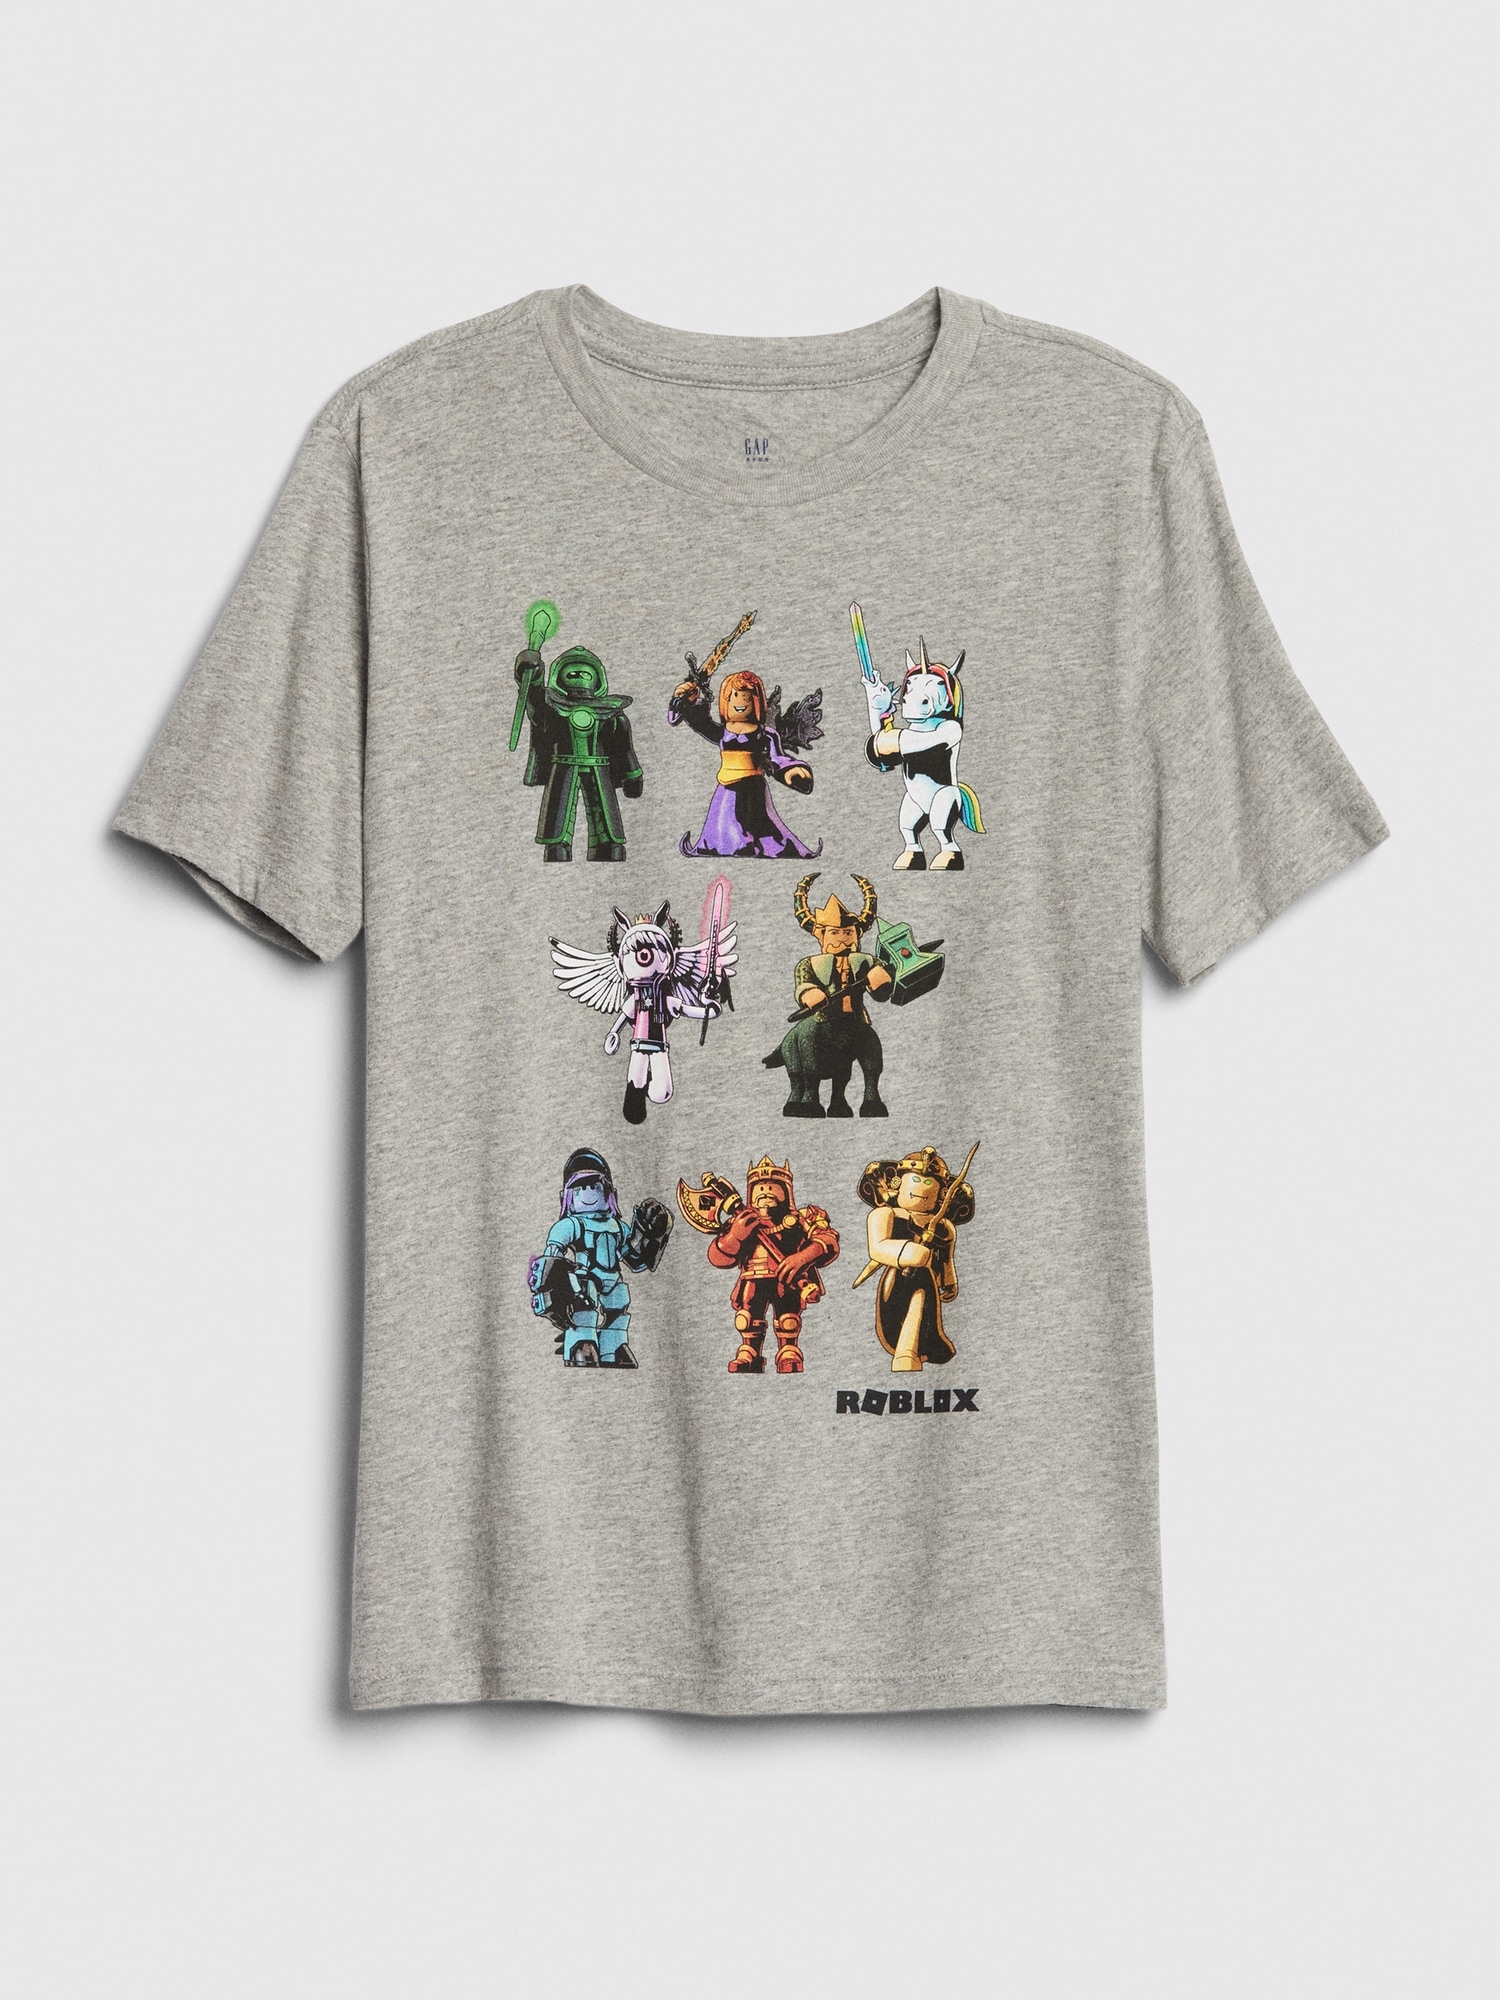 Best Free Shirts On Roblox